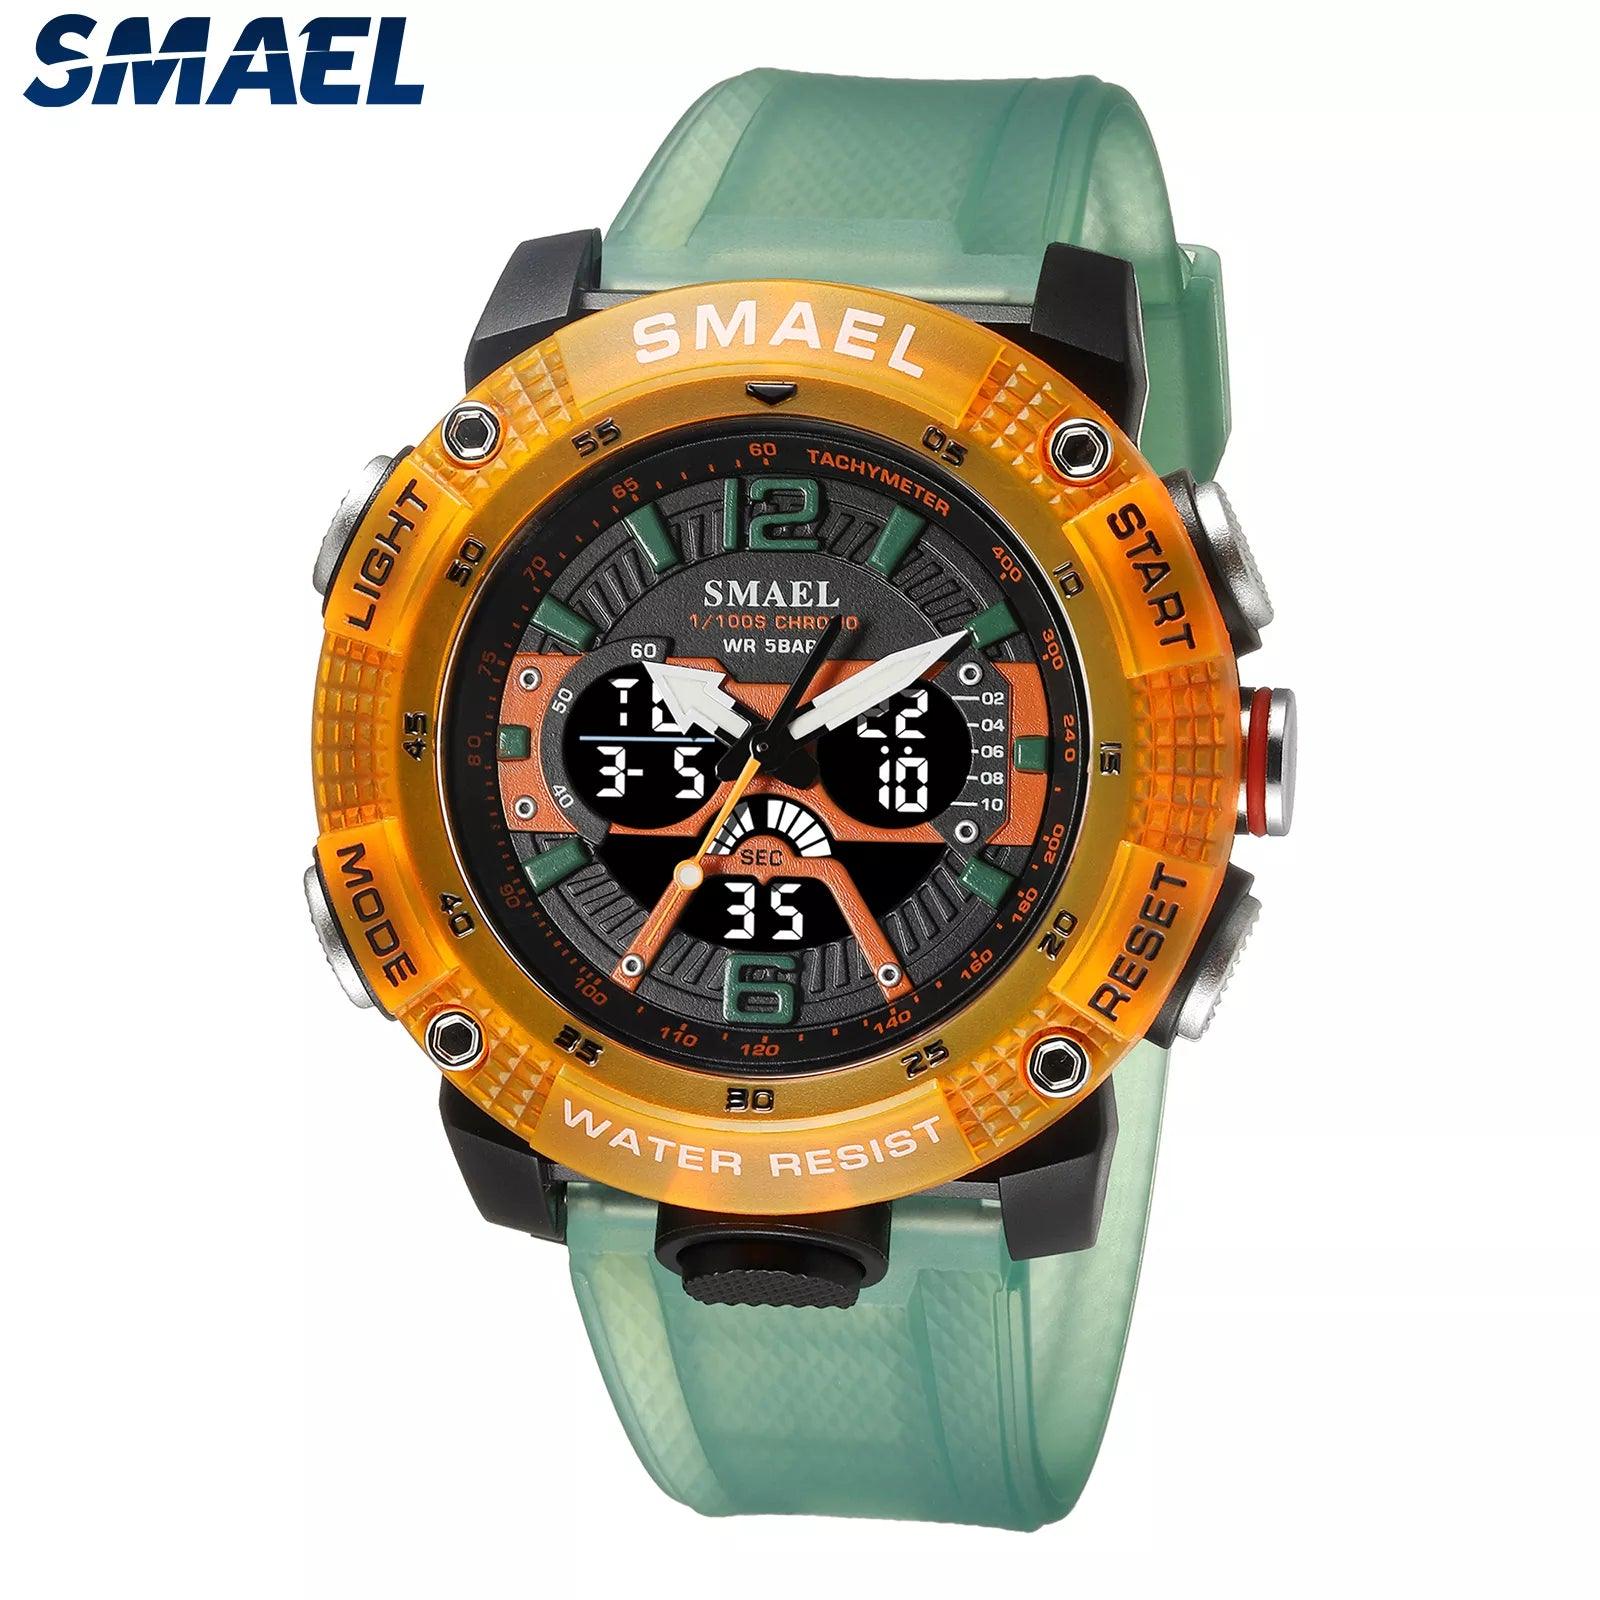 SMAEL Men's Dual Display Waterproof Sport Watch with Chronograph Functions  ourlum.com   